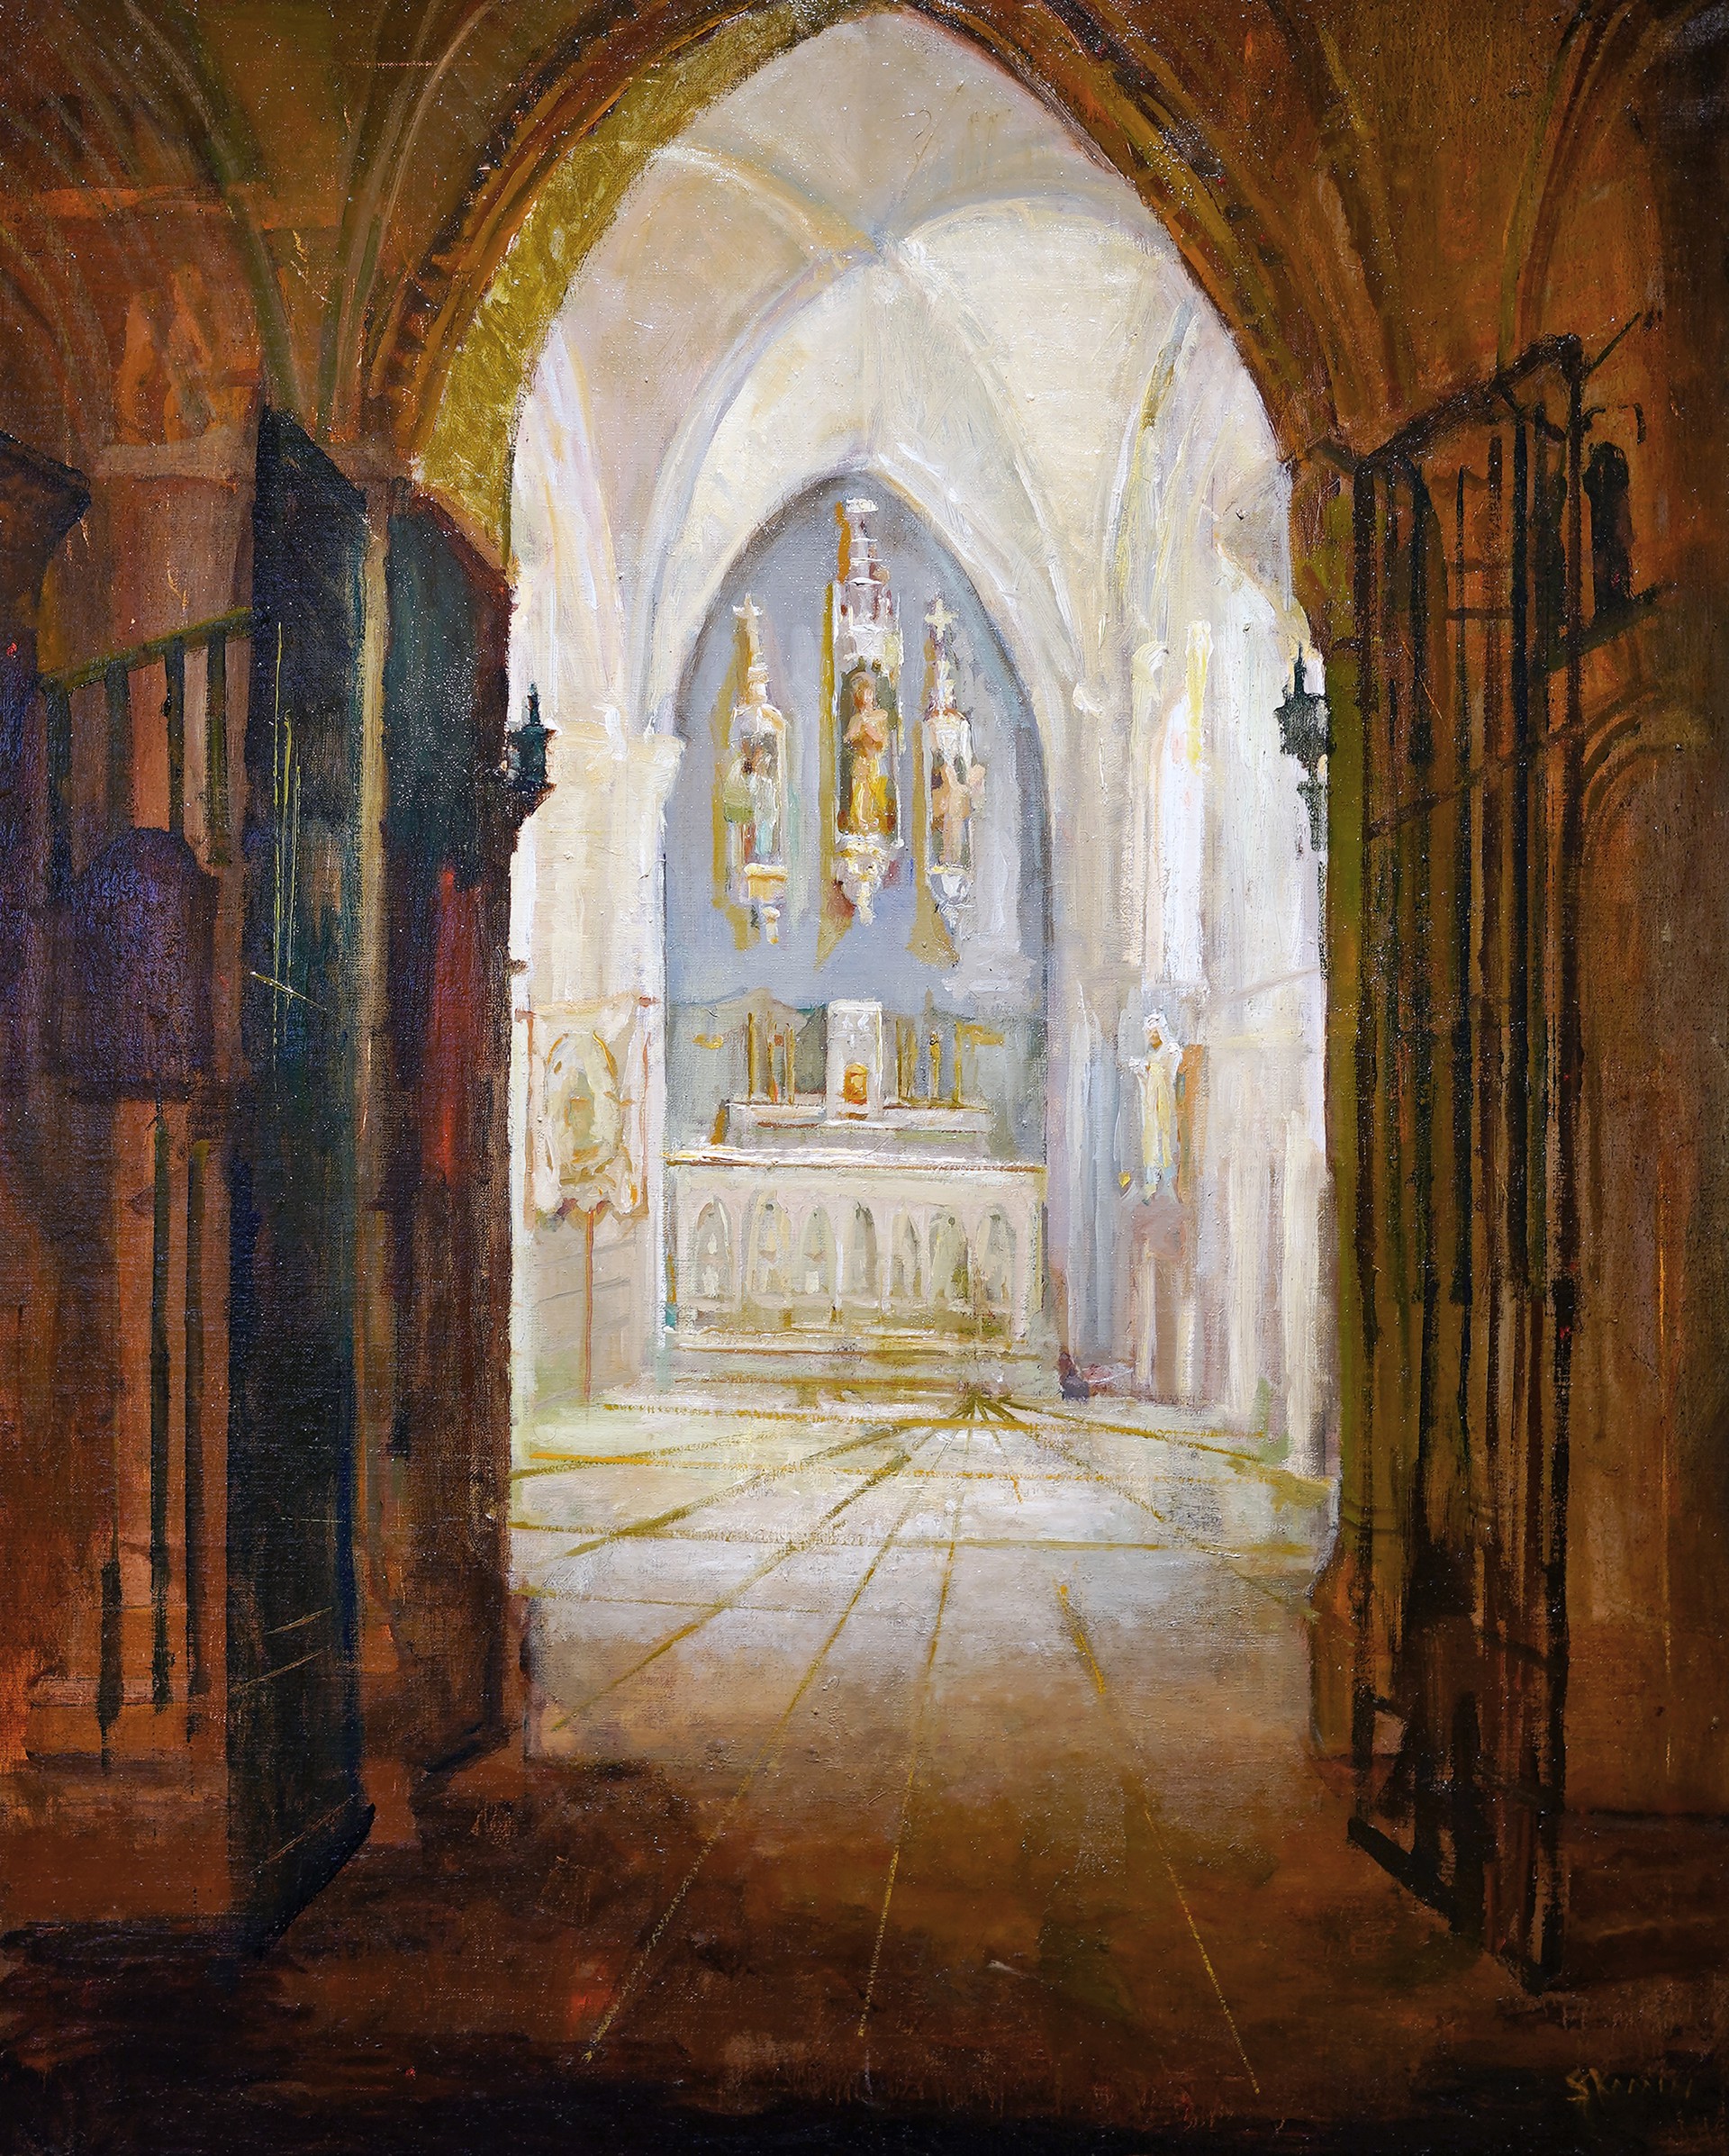 Holy Place by Stacy Kamin